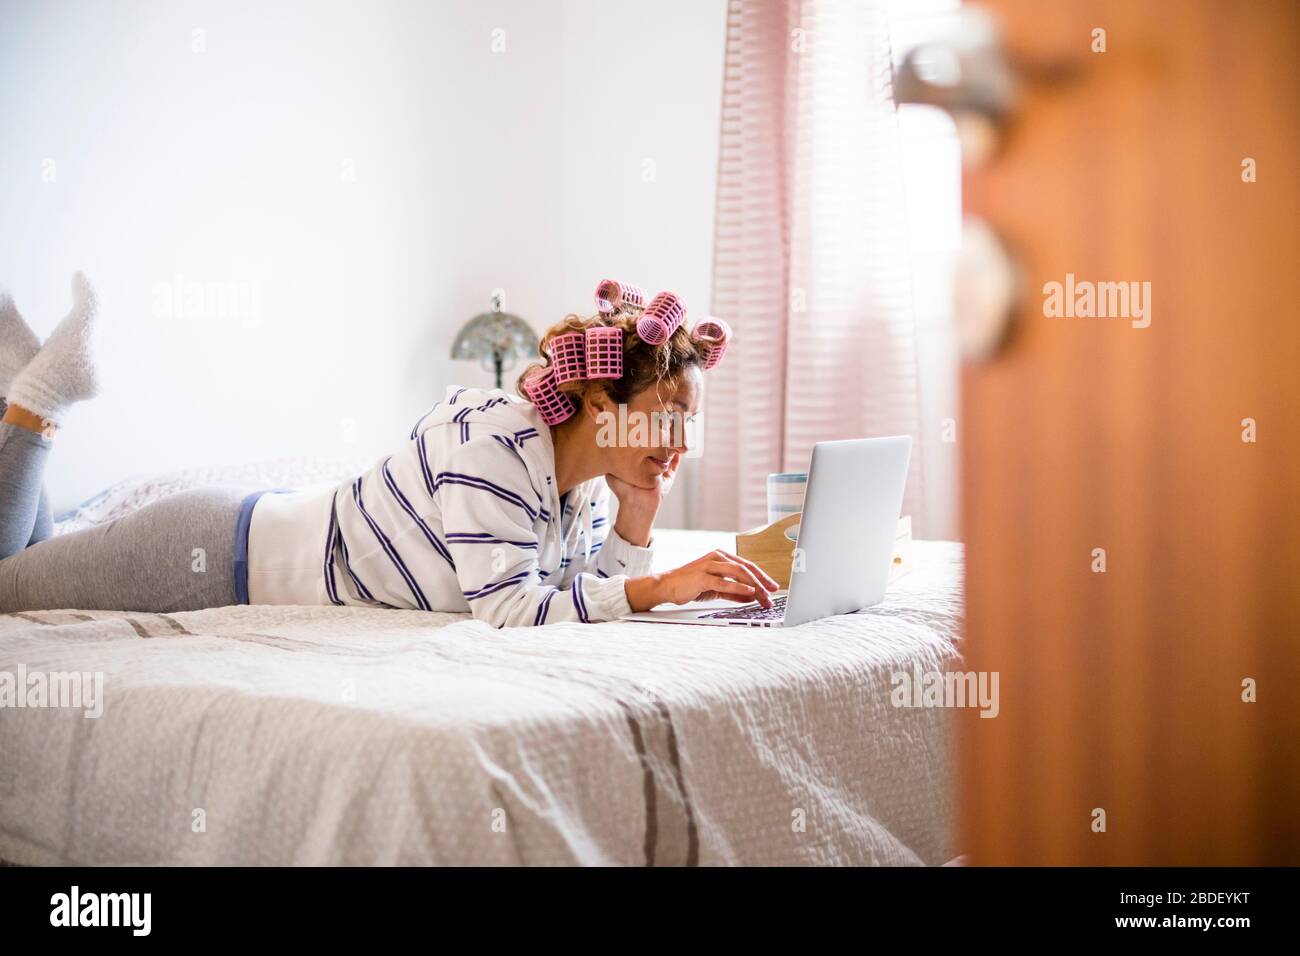 Woman with hair curlers lying on bed and using laptop Stock Photo